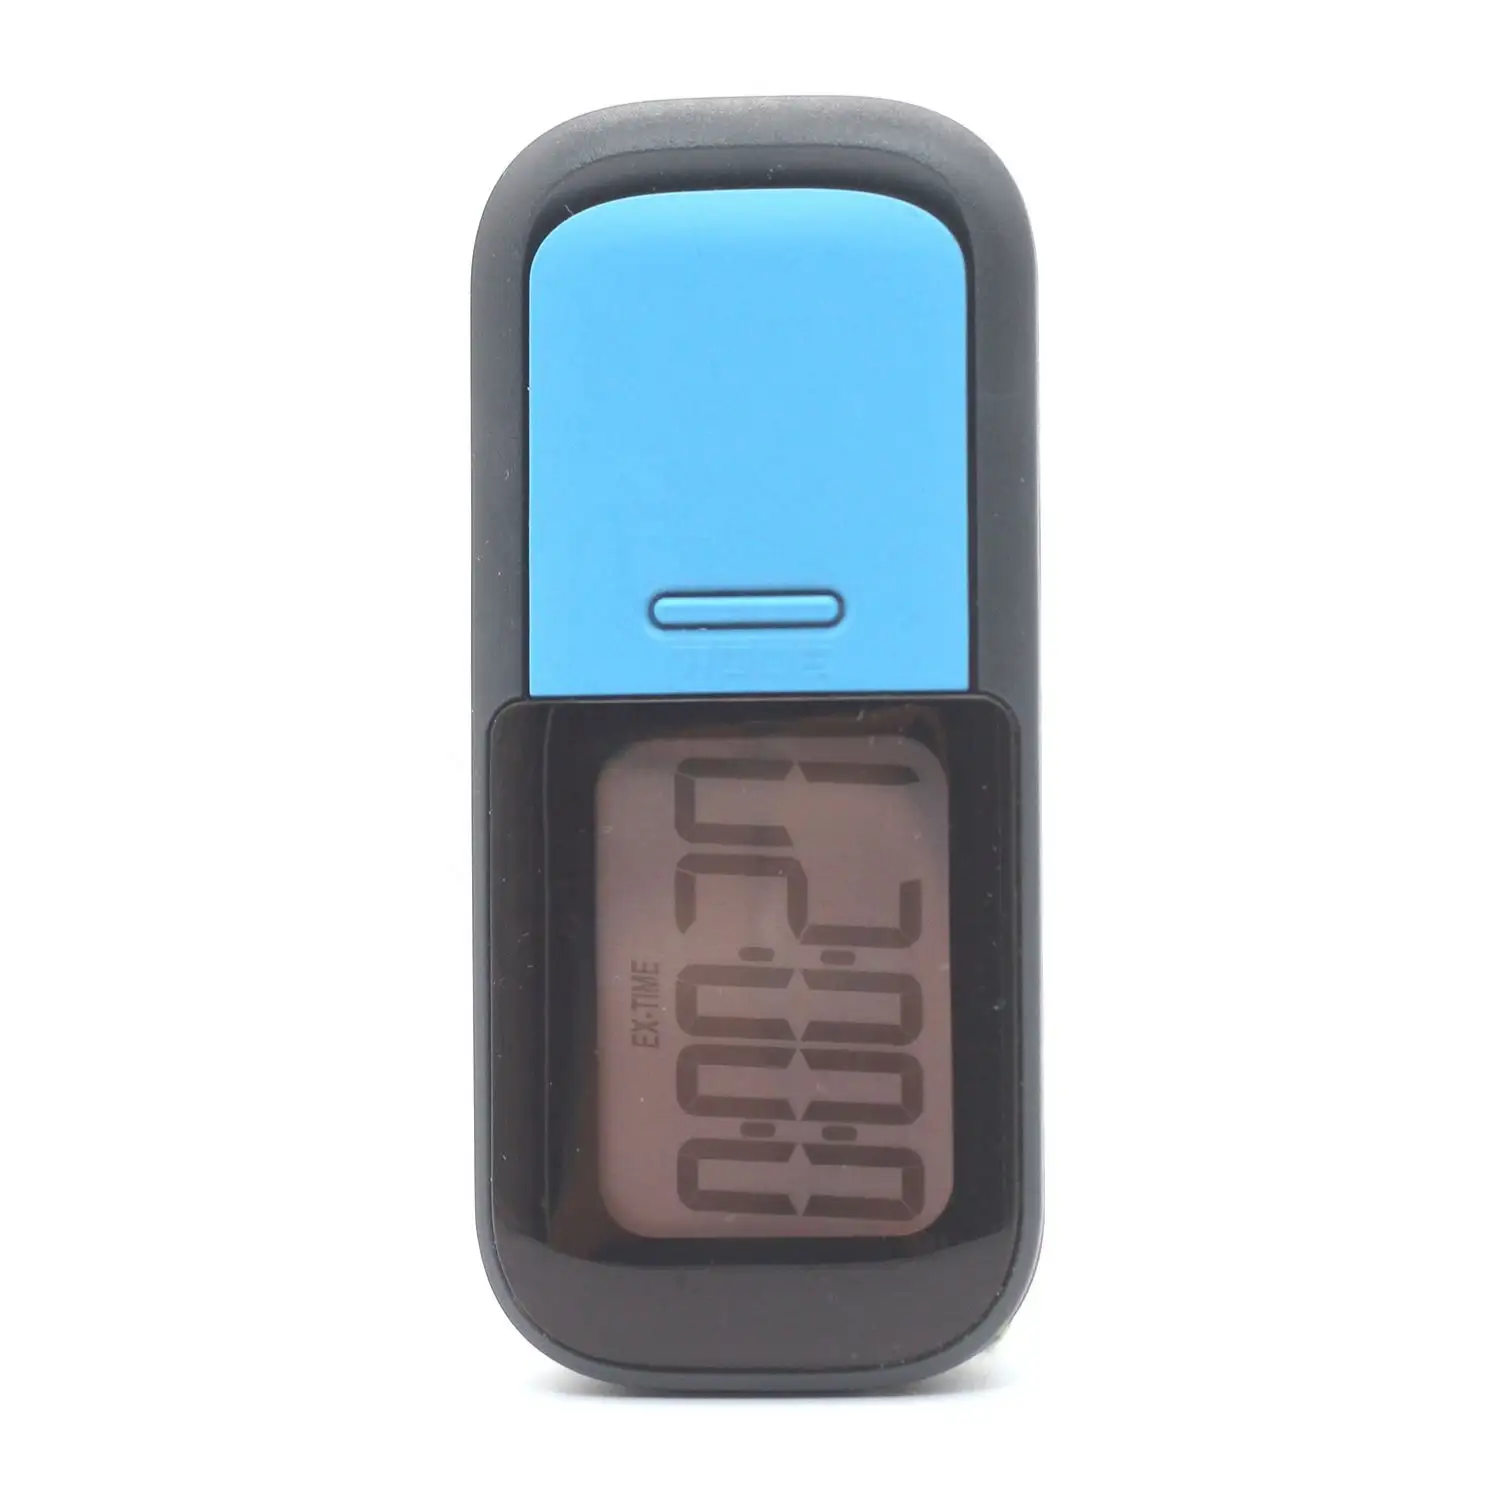 Accurate Mechanical Big Display Clip On Pedometer Step Counter for elderly